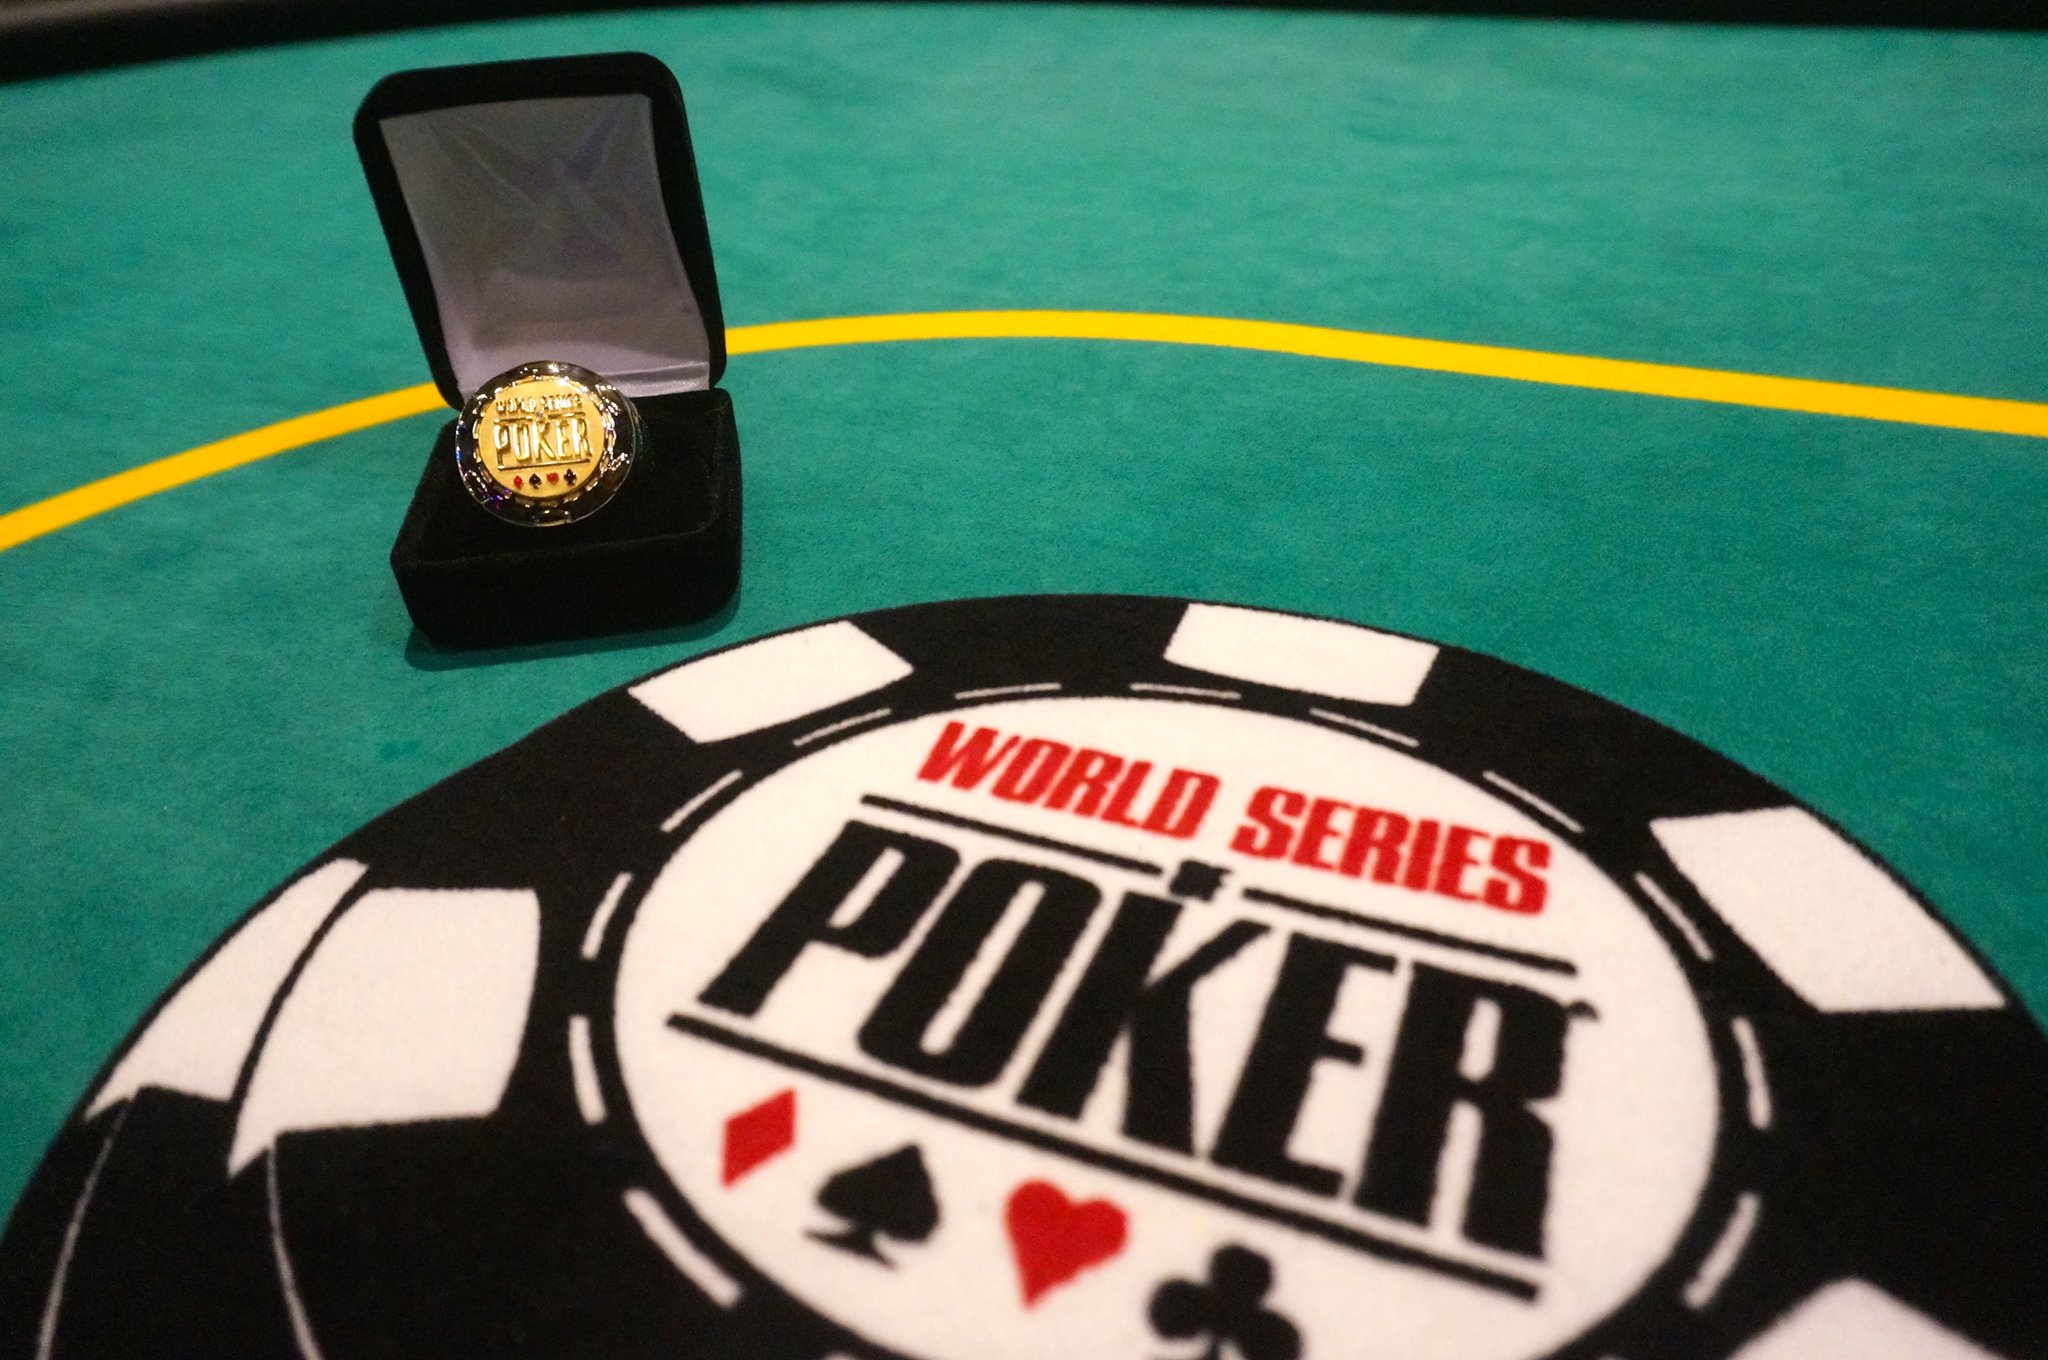 World Series of Poker is offering two ticket to Super Bowl